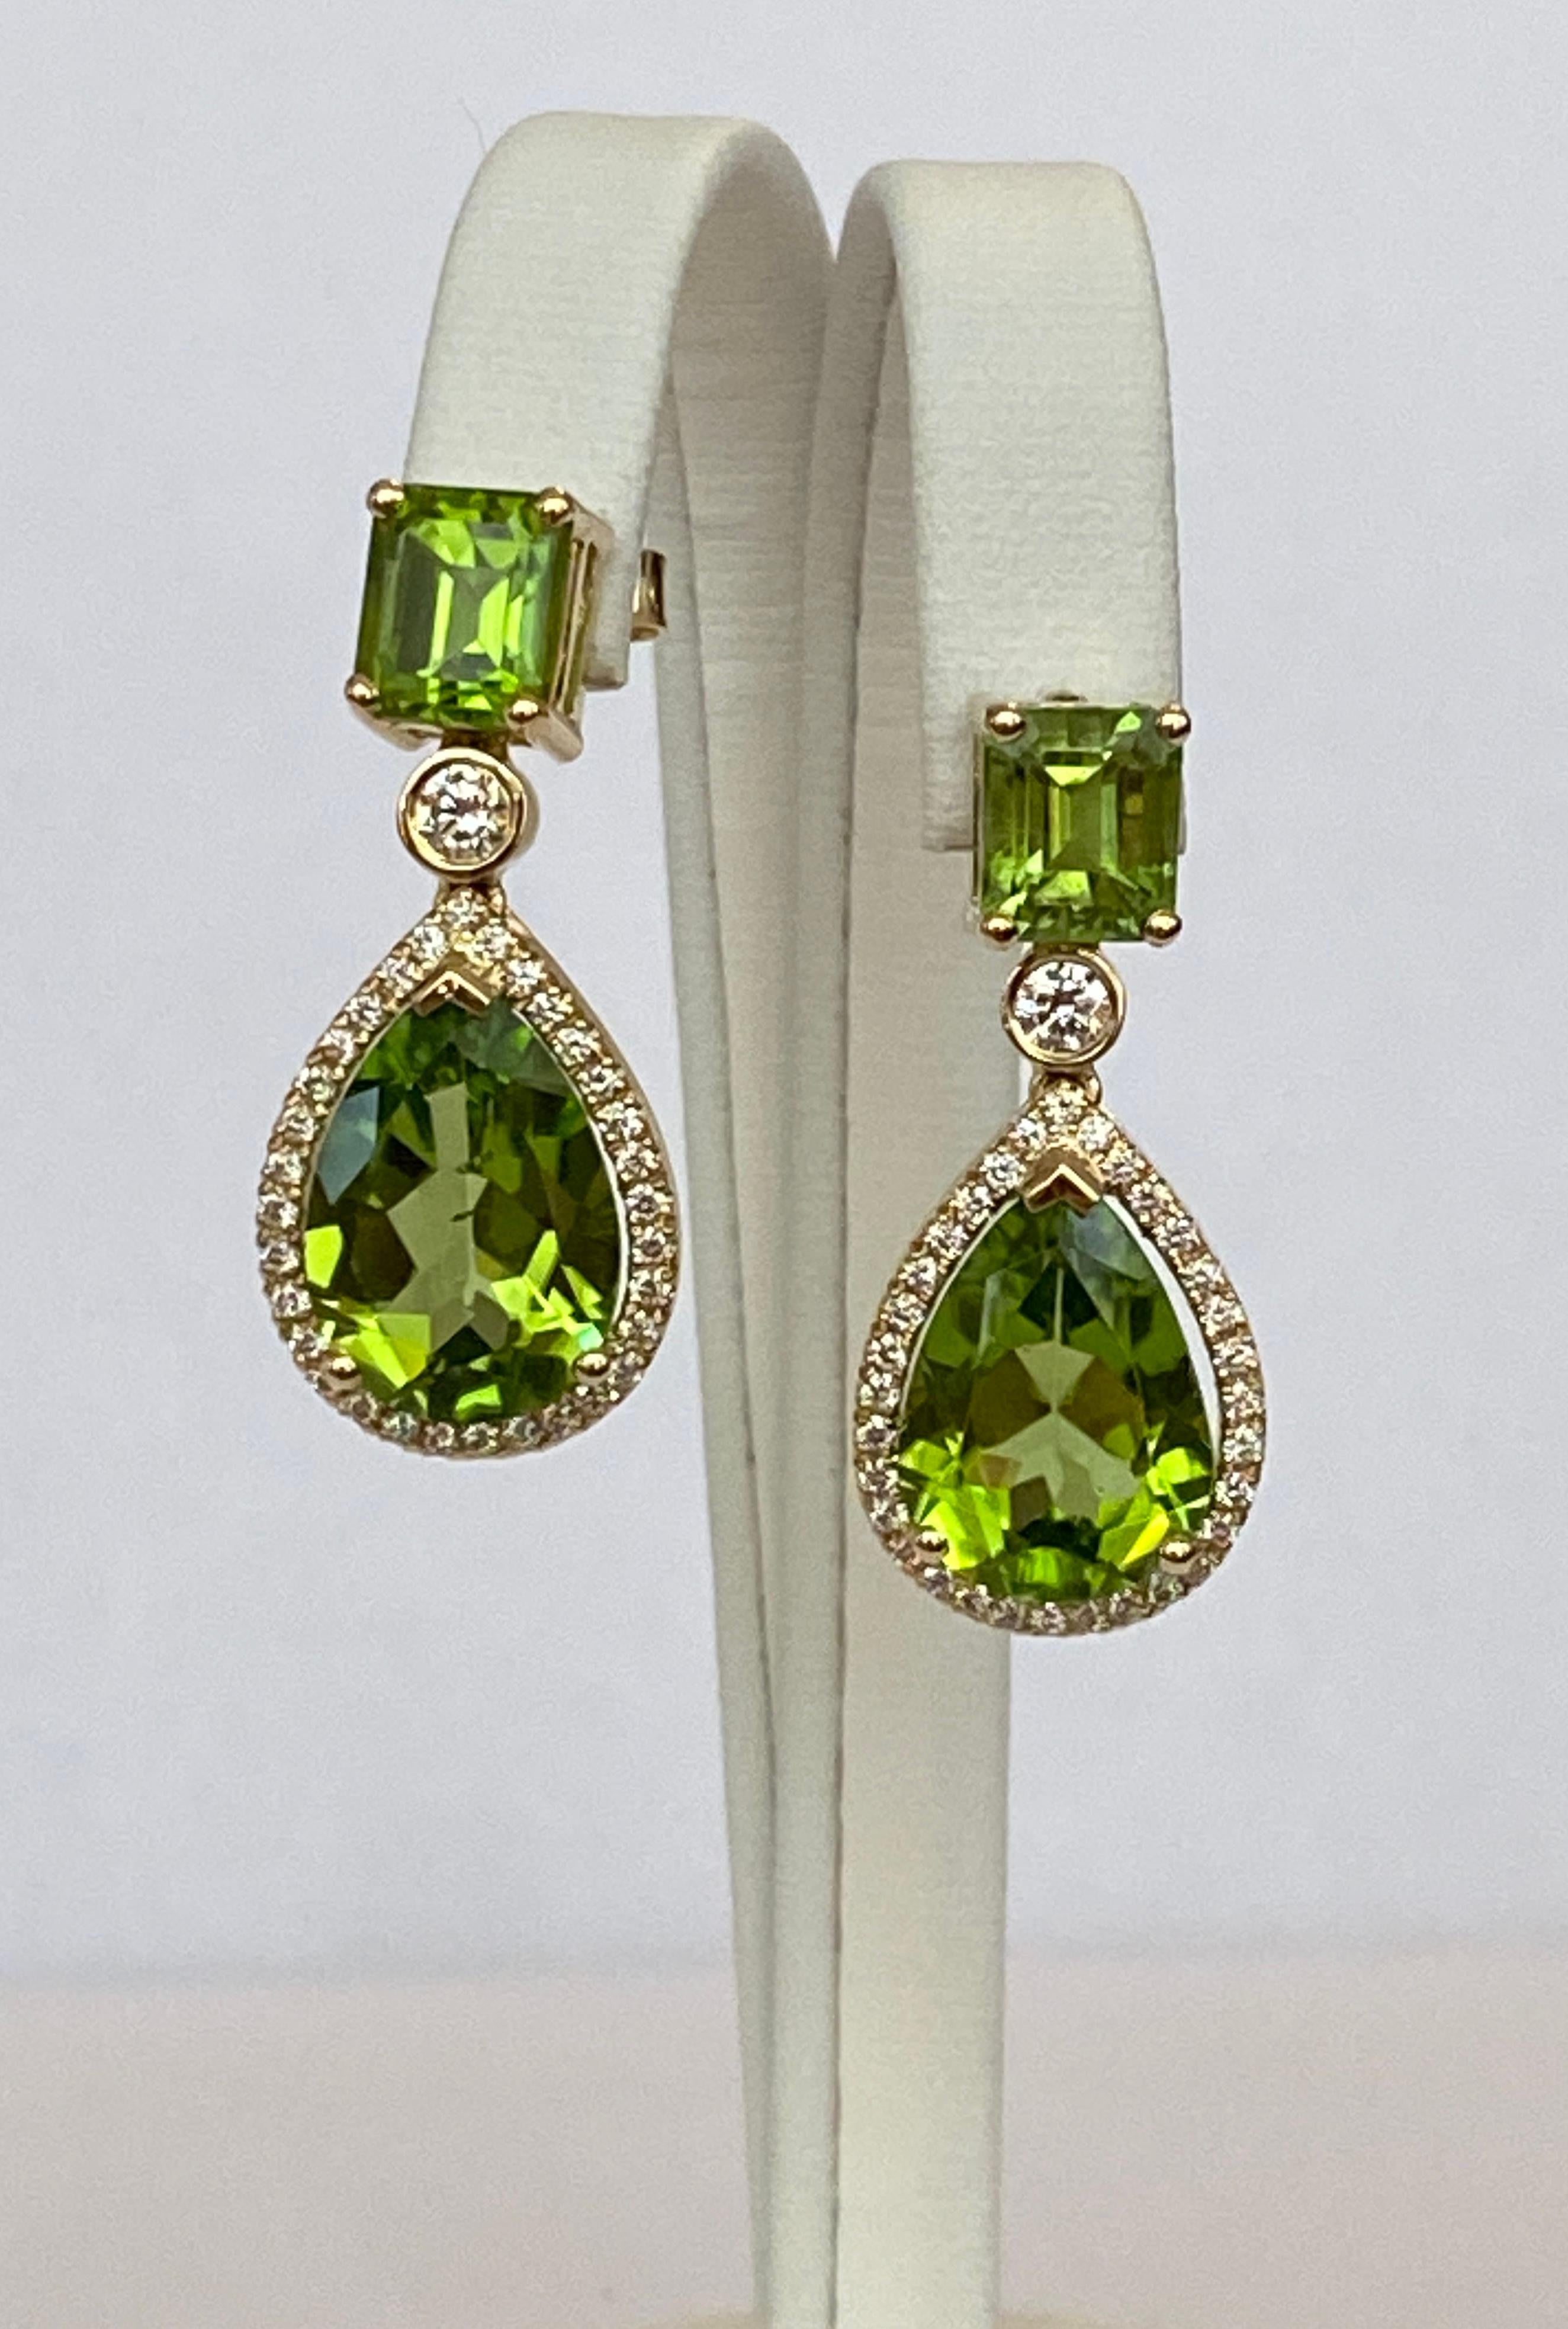 Offered in new condition, beautiful earrings in yellow 18 kt  gold with peridot and diamonds. ALGT certificate is included. Exclusive handmade  jewelry with high quality stones!

2 octagon step cut peridot total 4.35 ct Intense Yellowish green
2